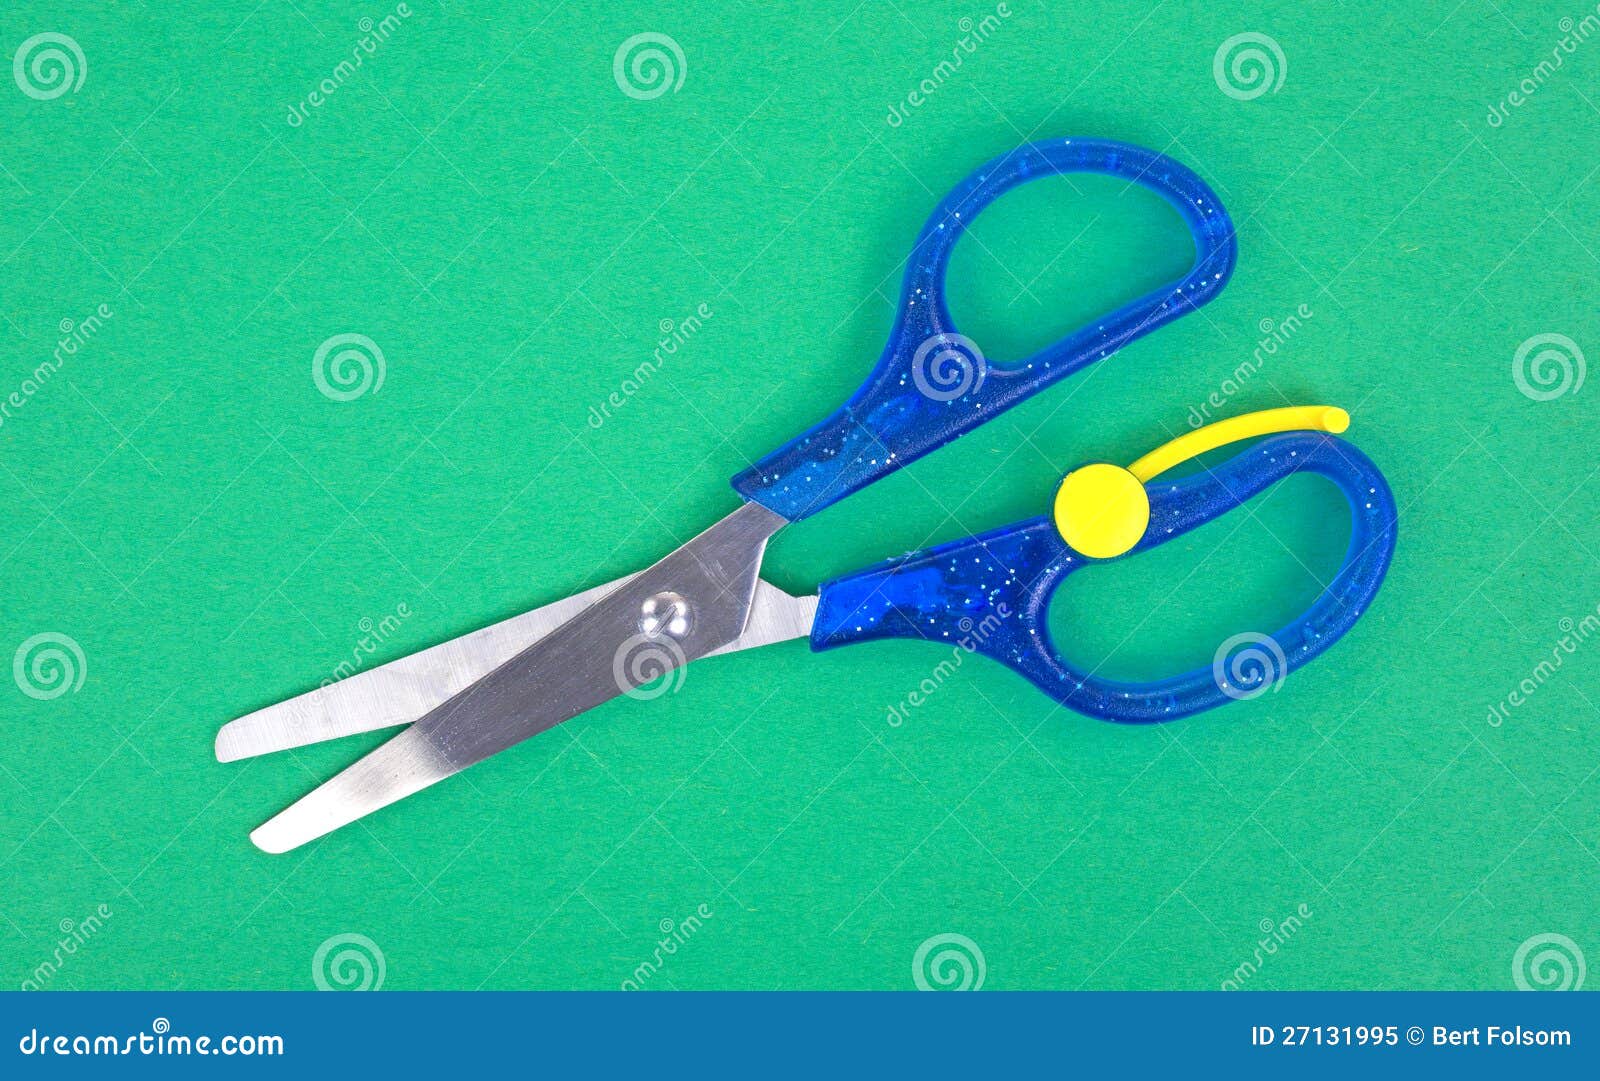 Child S Scissors on Green Craft Paper Stock Image - Image of handles,  paper: 27131995